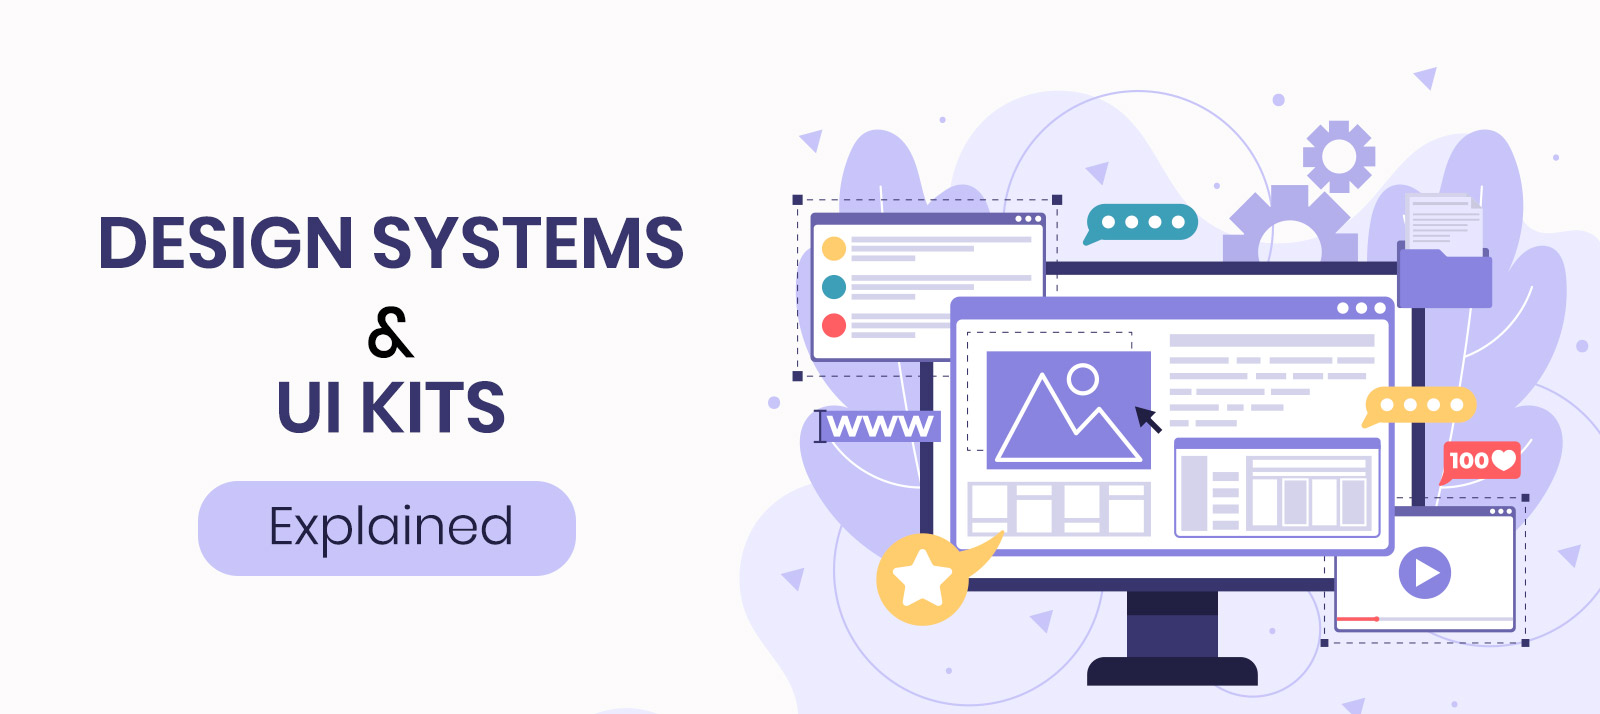  Design Systems and UI Kits – Explained!